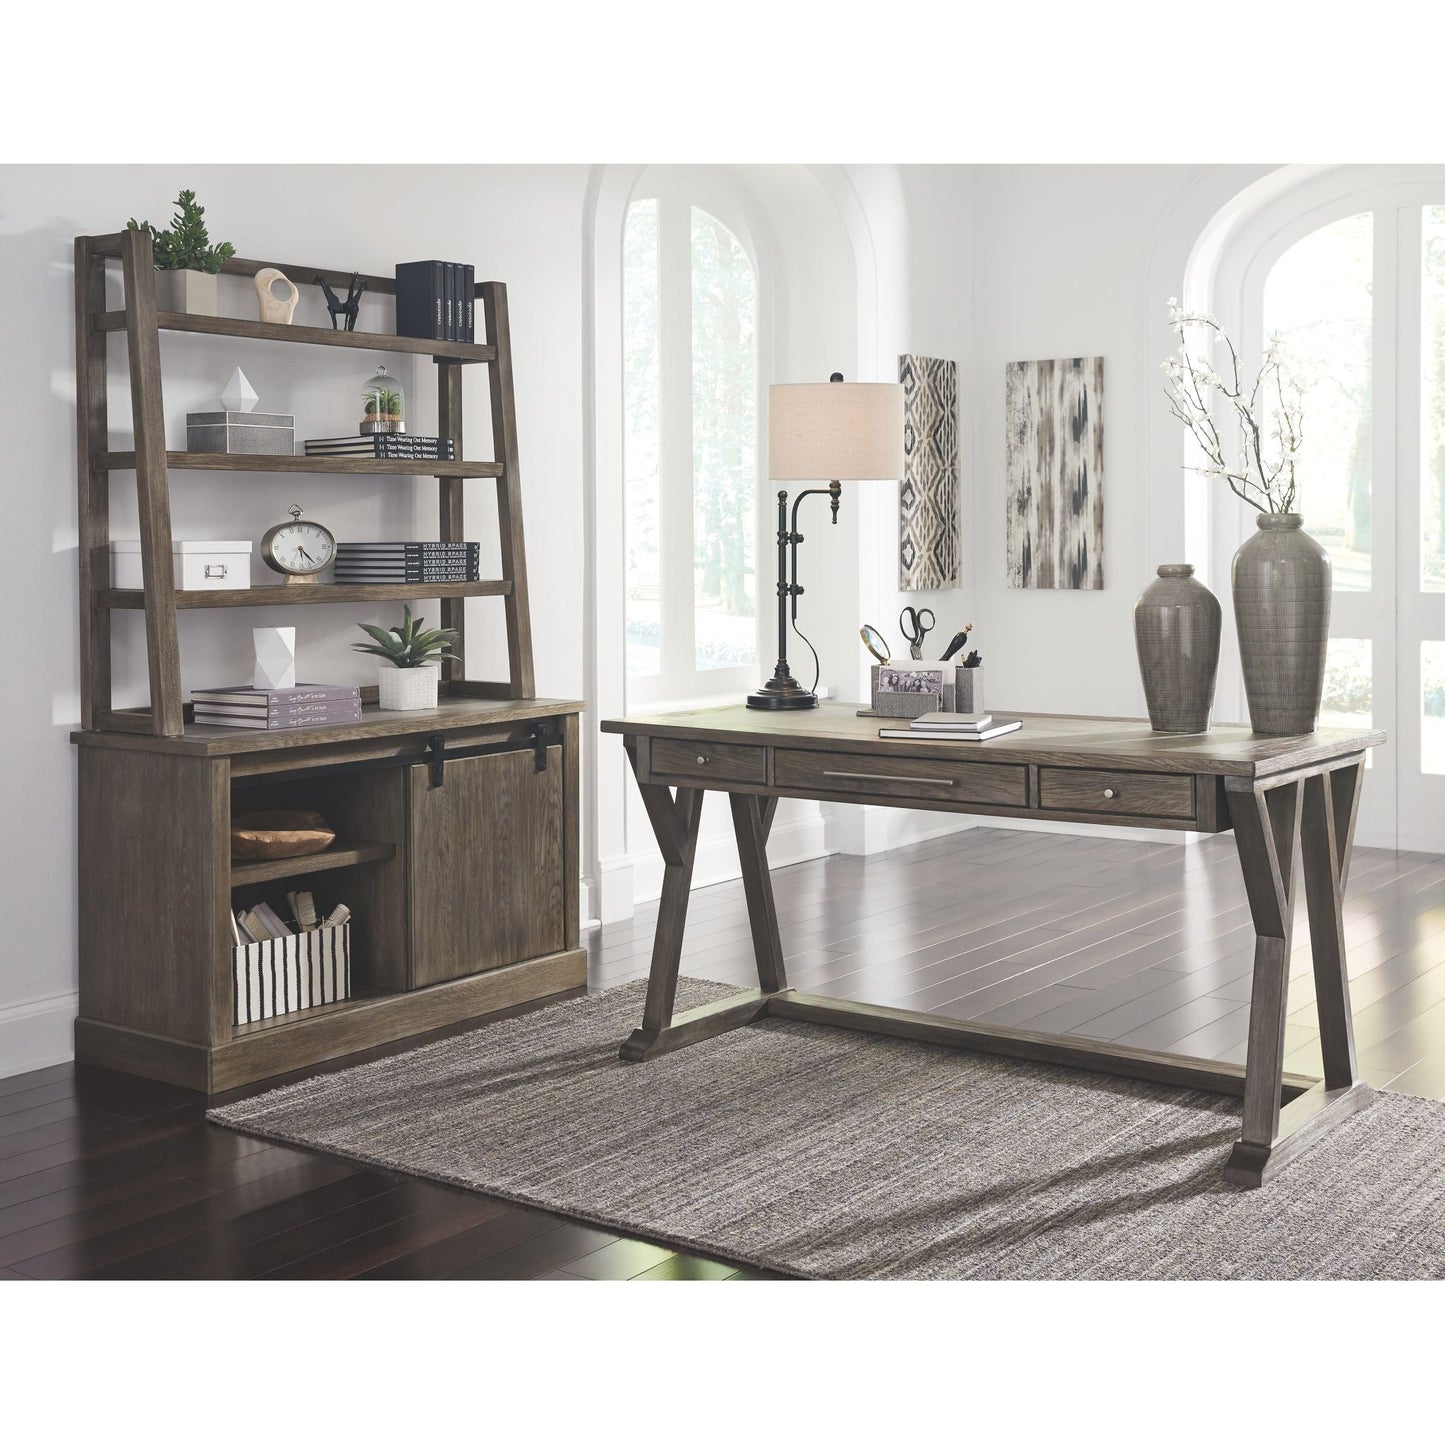 Luxenford 2 Piece Home Office Package - Grayish Brown